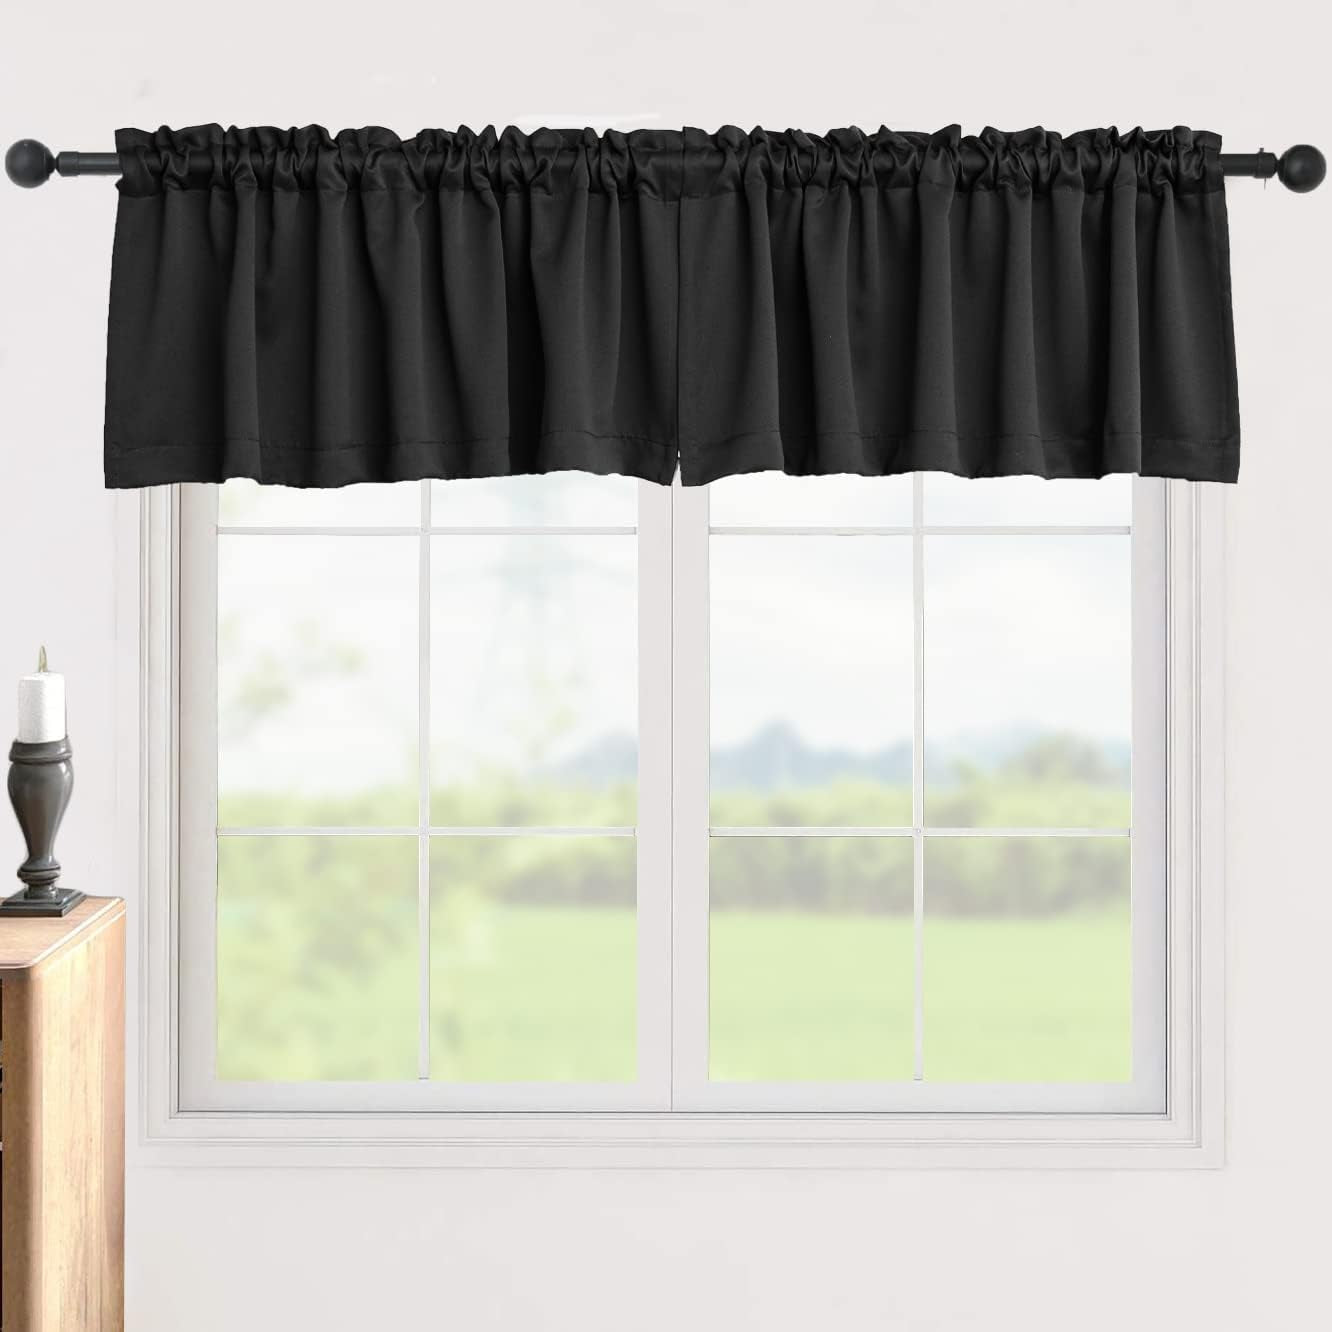 Blackout Valance Curtains 18 Inches Long, Short Curtains with Rod Pocket for Window in Kitchen, Bathroom, Living Room, Bedroom or Basement, 2 Panels, 52" W X 18" L, Teal